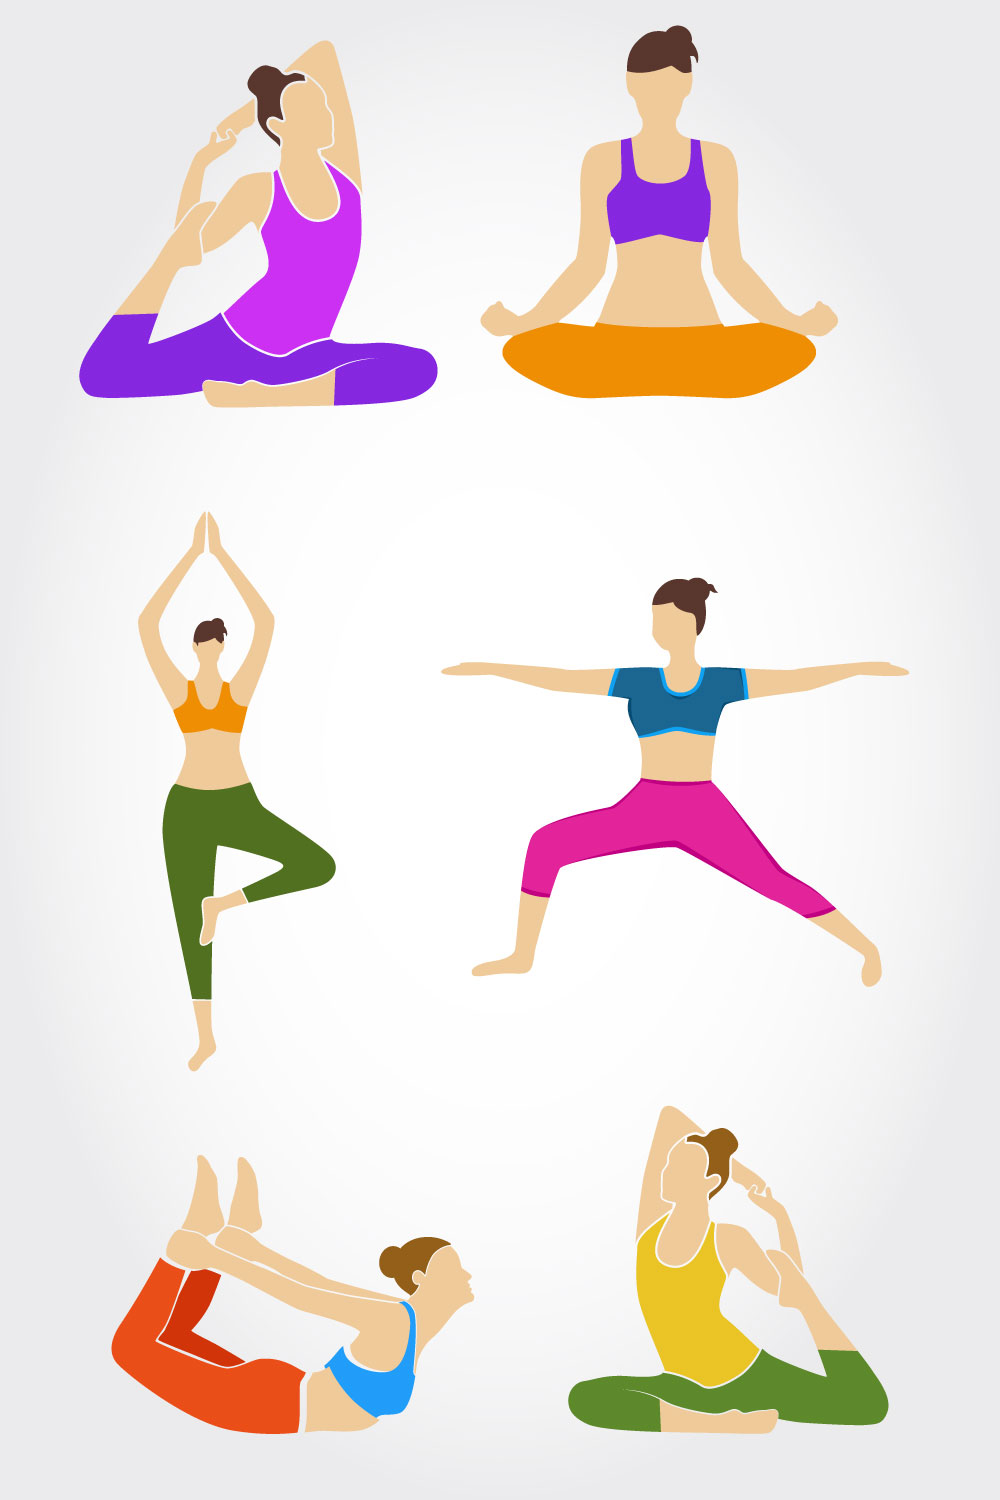 Yoga Pose Free Sports Vector, Yoga Pose, Yoga Poses, Yoga Poses Clipart PNG  and Vector with Transparent Background for Free Download